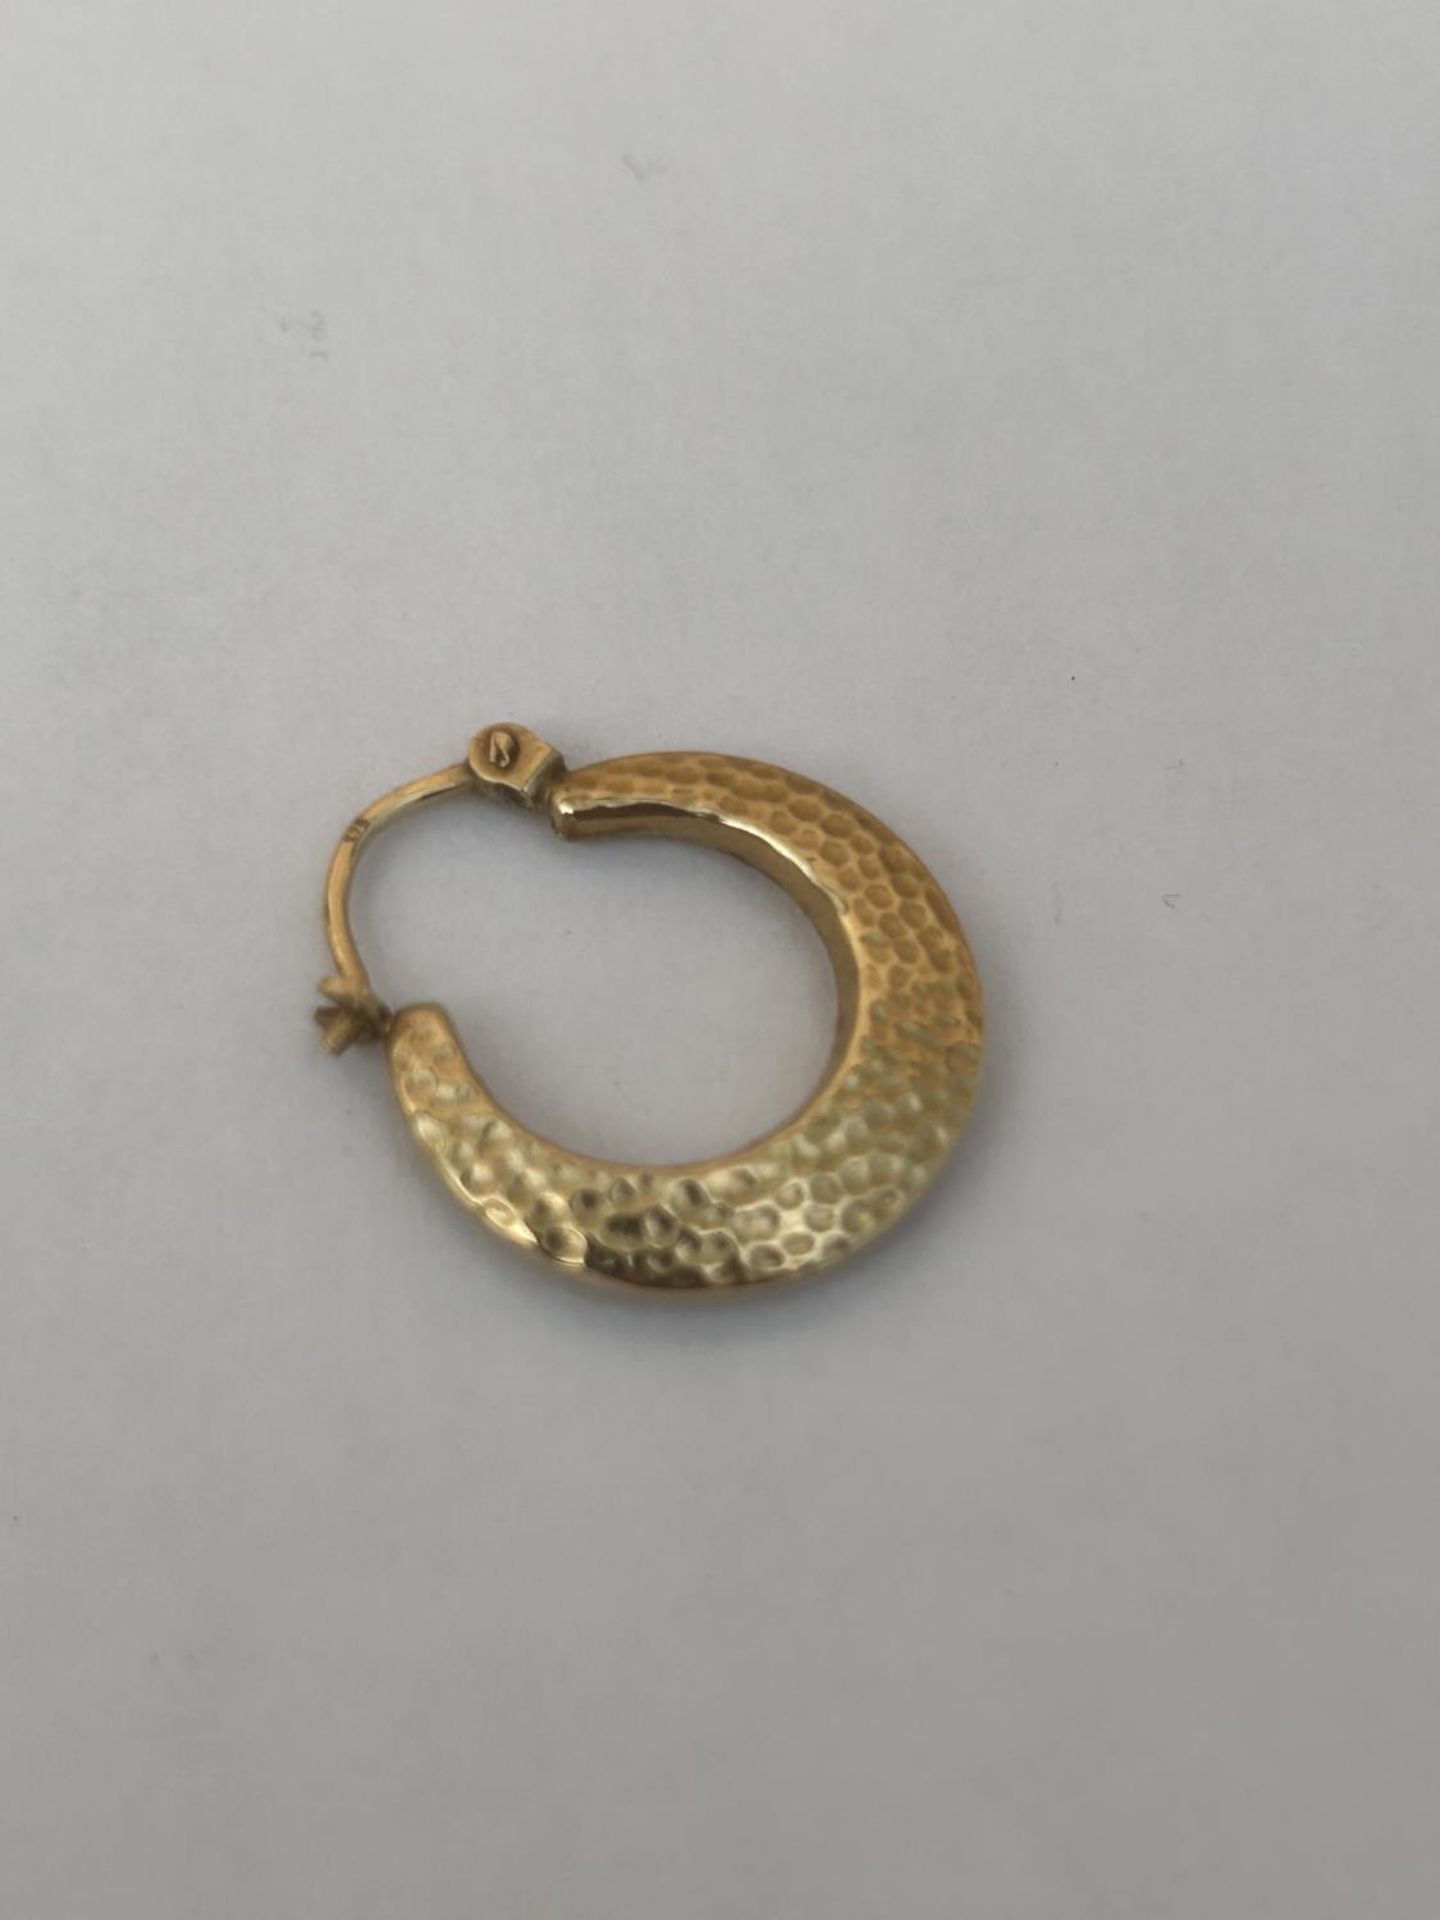 A PAIR OF 9CT GOLD HALF MOON EARRINGS, WEIGHT 1.5 G - Image 3 of 3